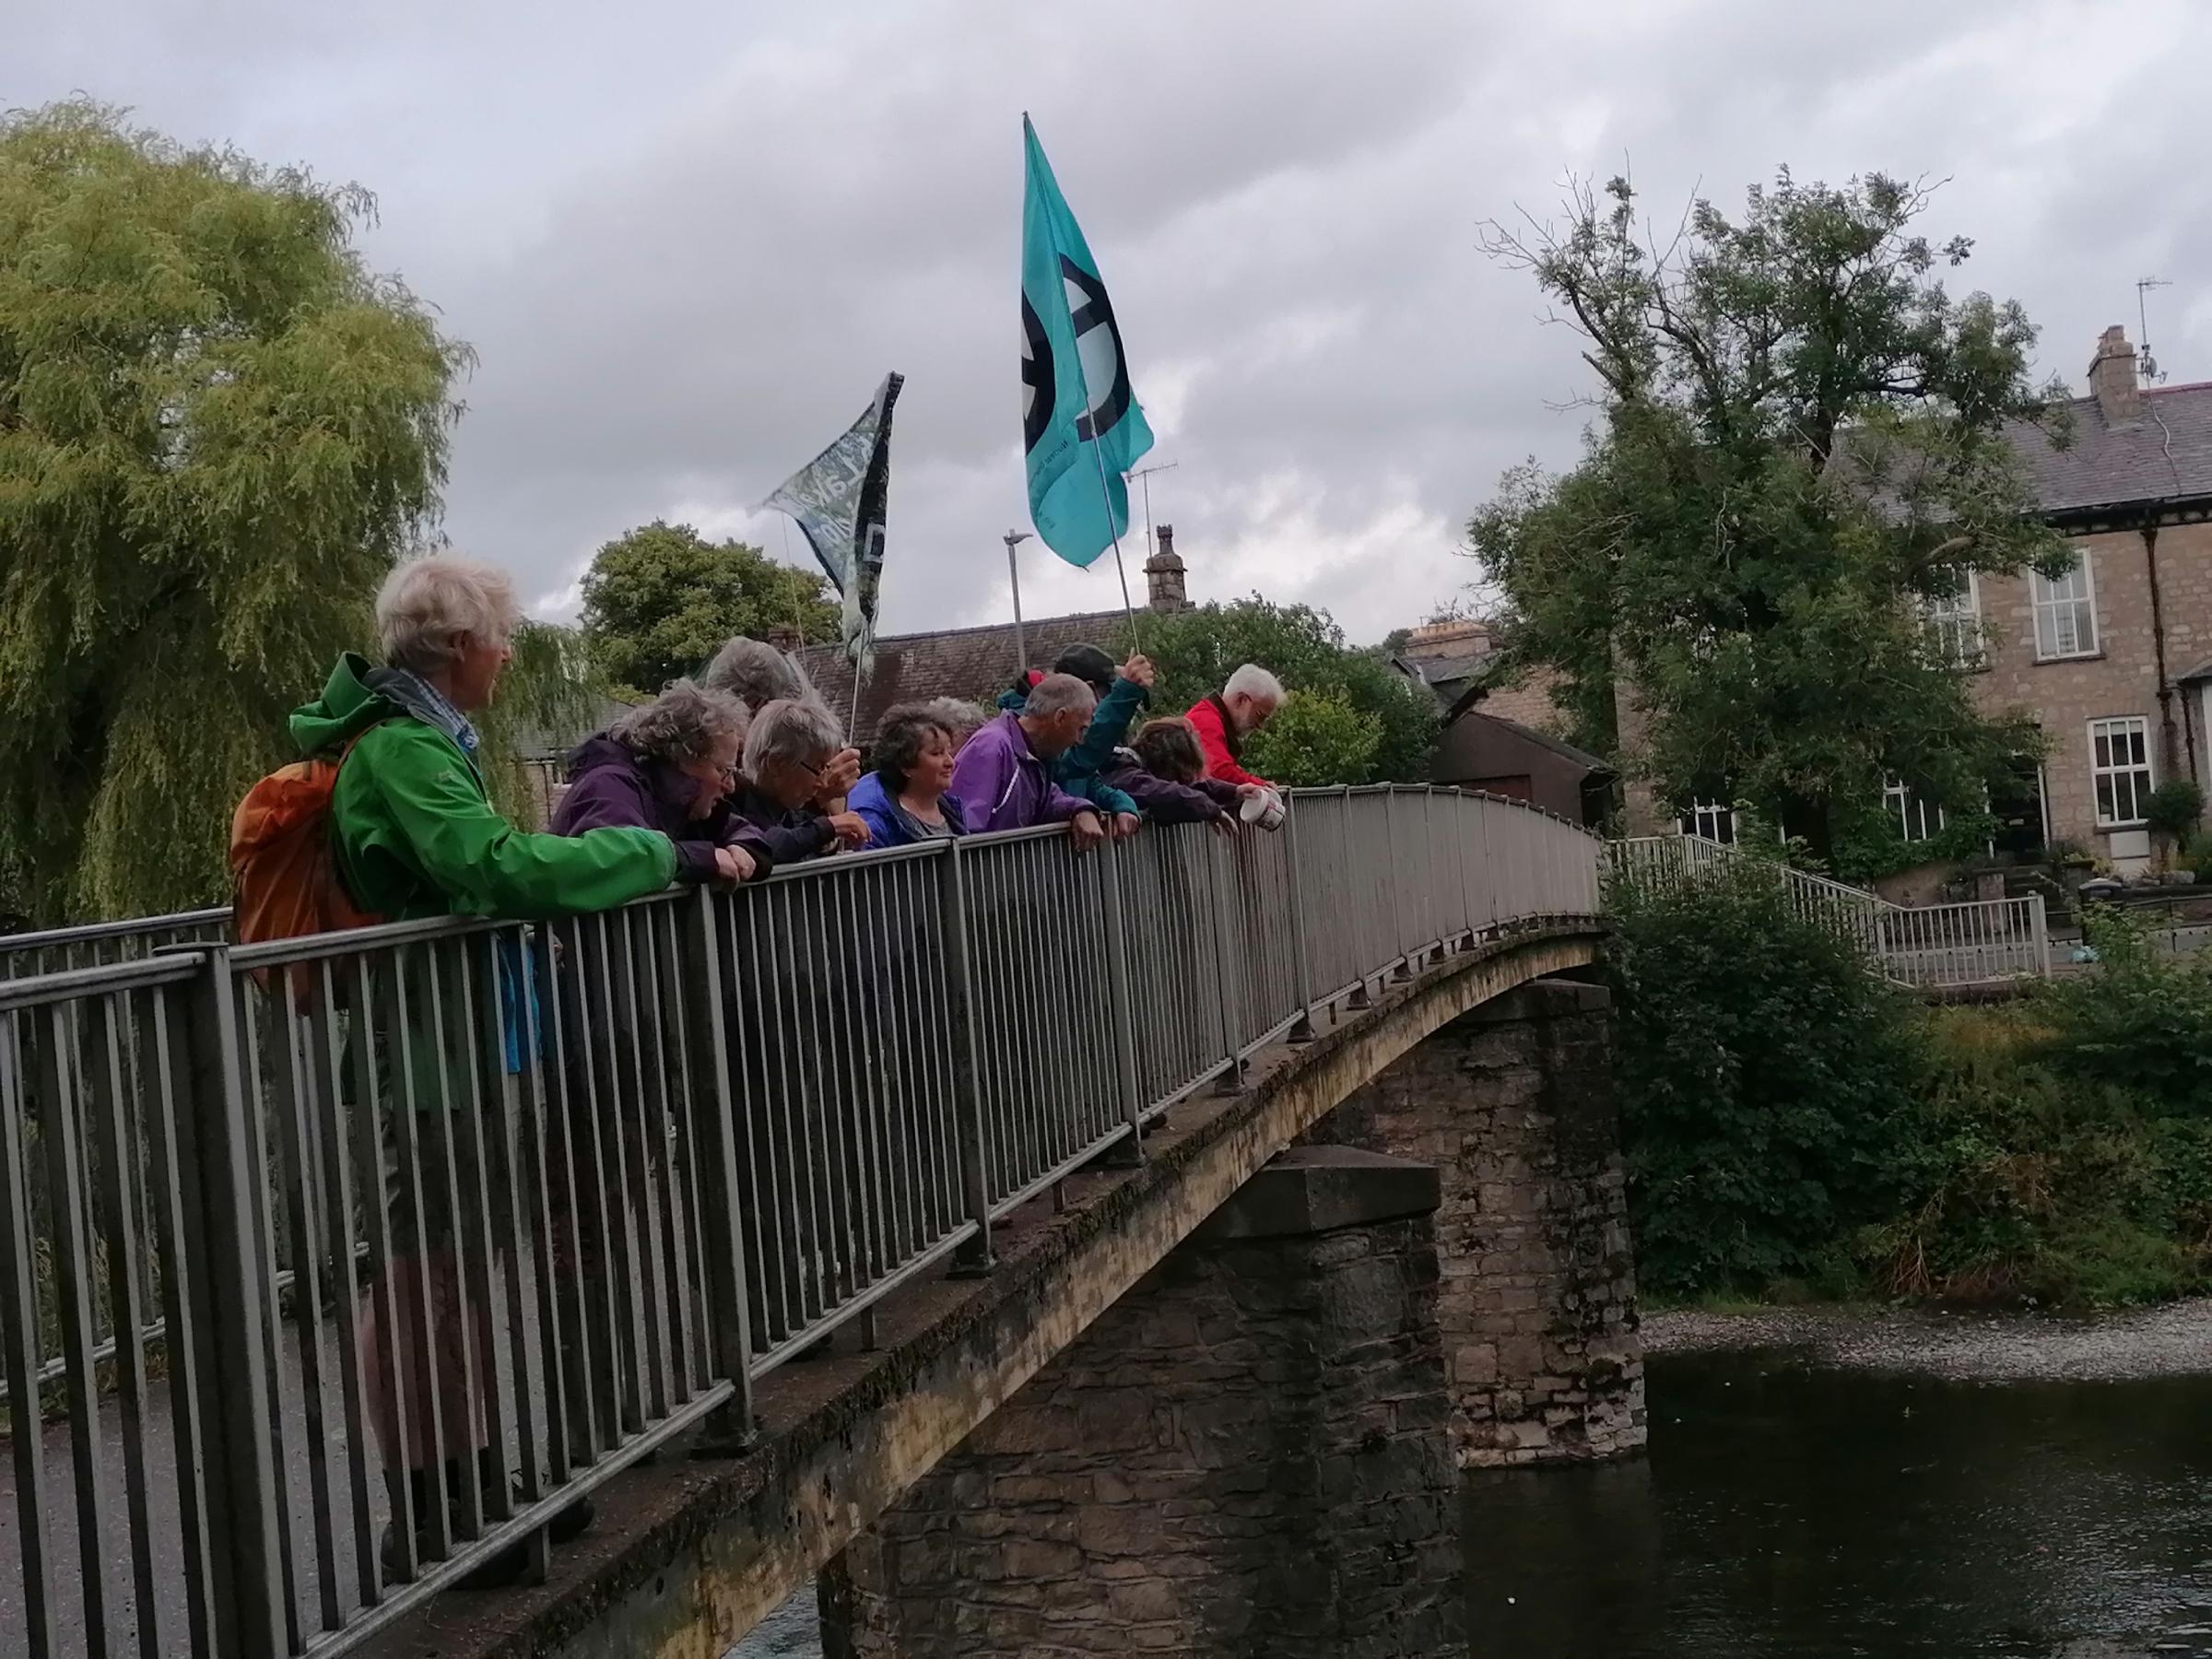 CAMPAIGN: Demonstration at Abbot Hall Park in Kendal 